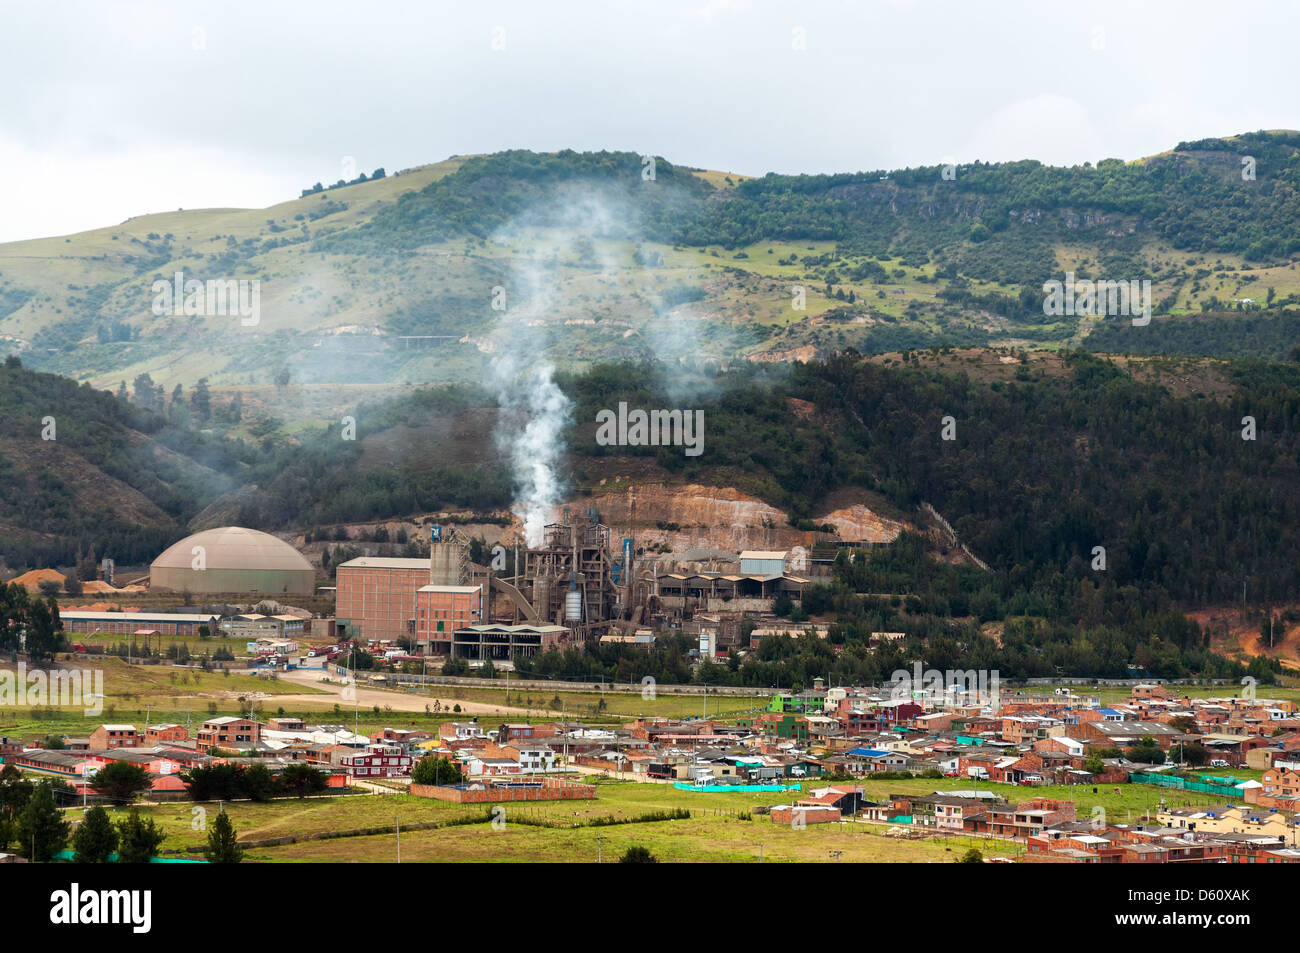 A factory producing pollution near a small town Stock Photo